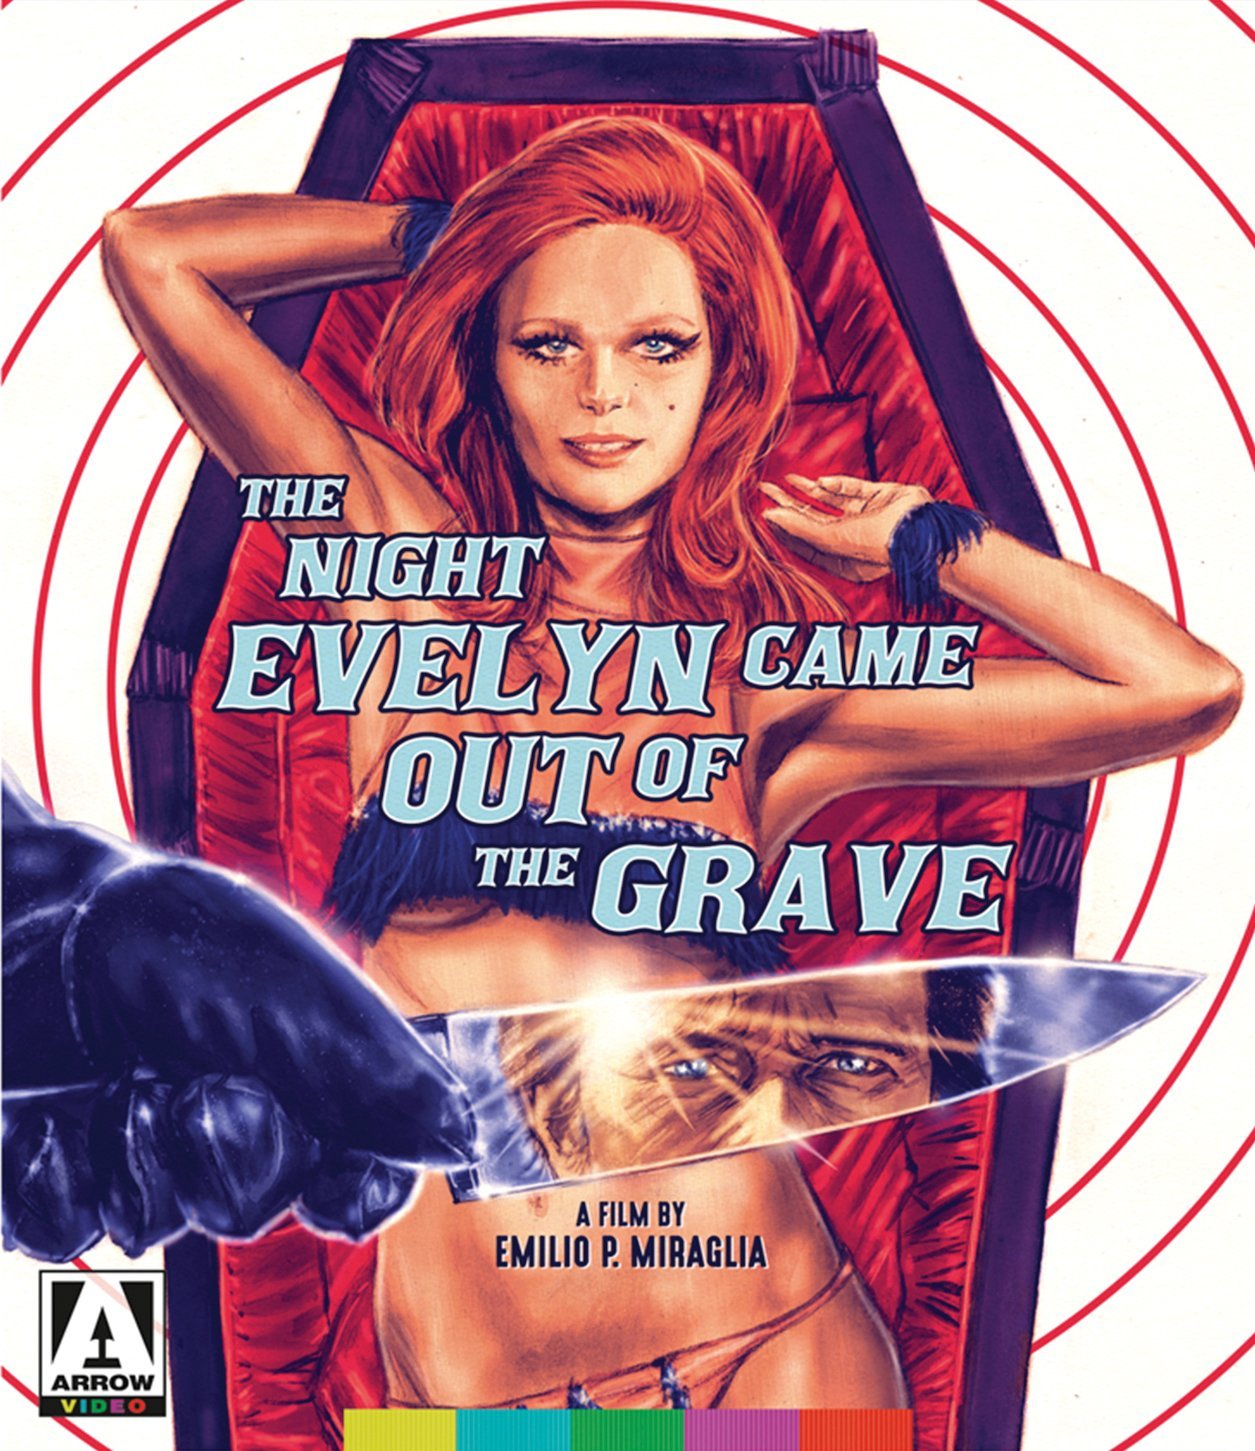 The Night Evelyn Came Out Of Grave Blu-Ray Blu-Ray